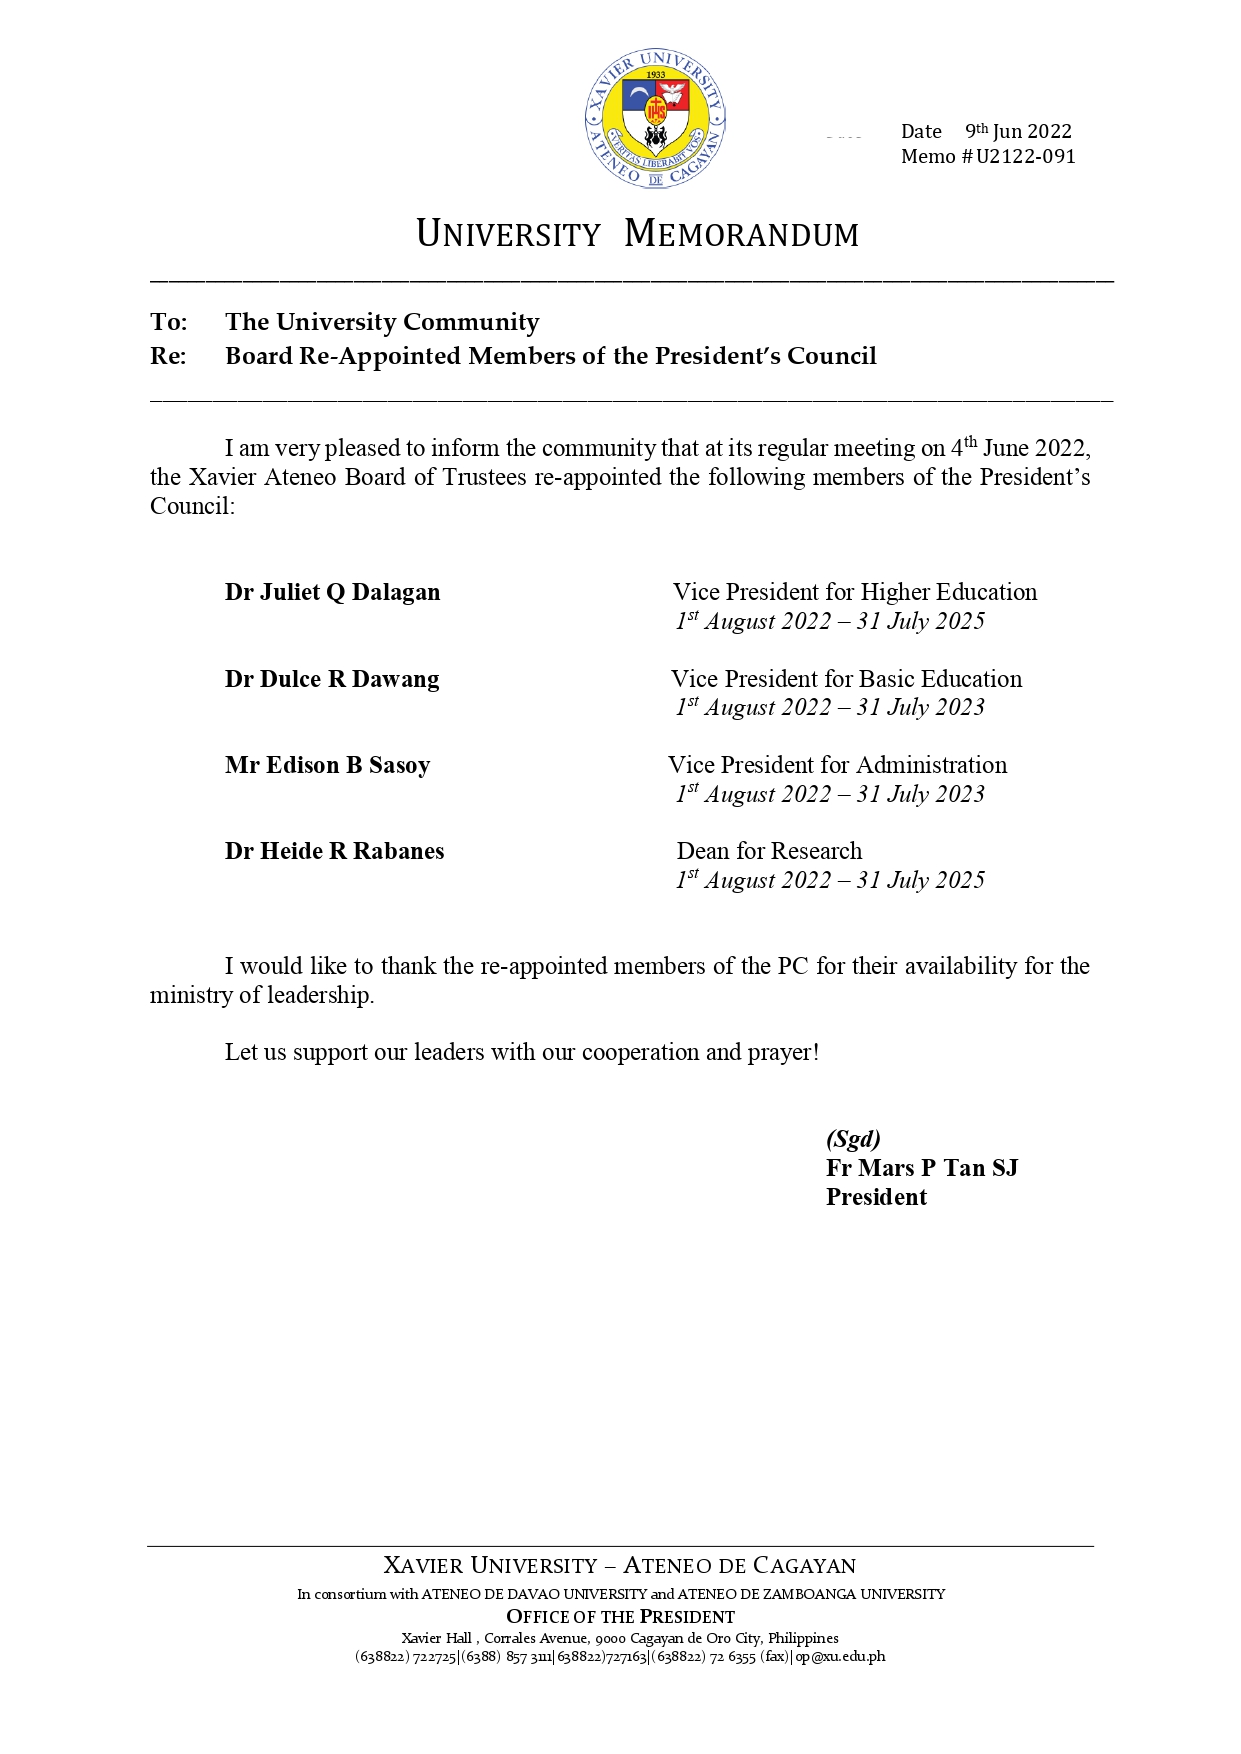 U2122 091 220609 Board Re Appointed Members of the Presidents Council page 0001